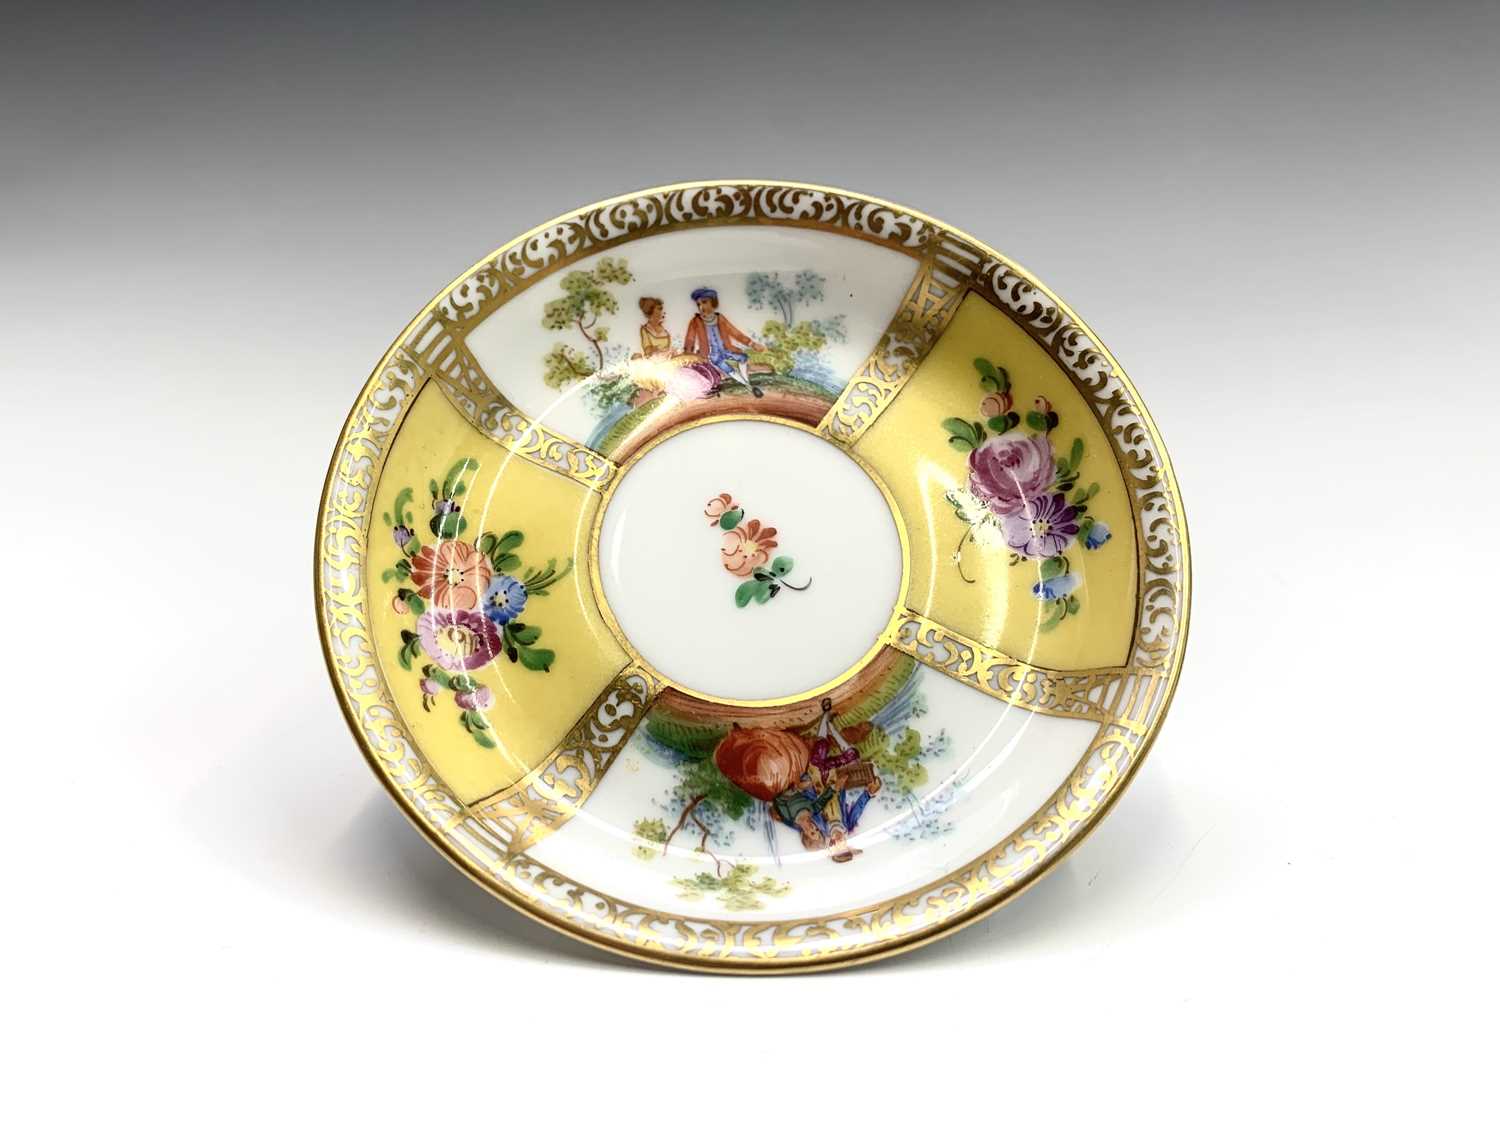 A Meissen cabinet cup and saucer, late 19th century, painted with reserves in the 18th century style - Image 9 of 9